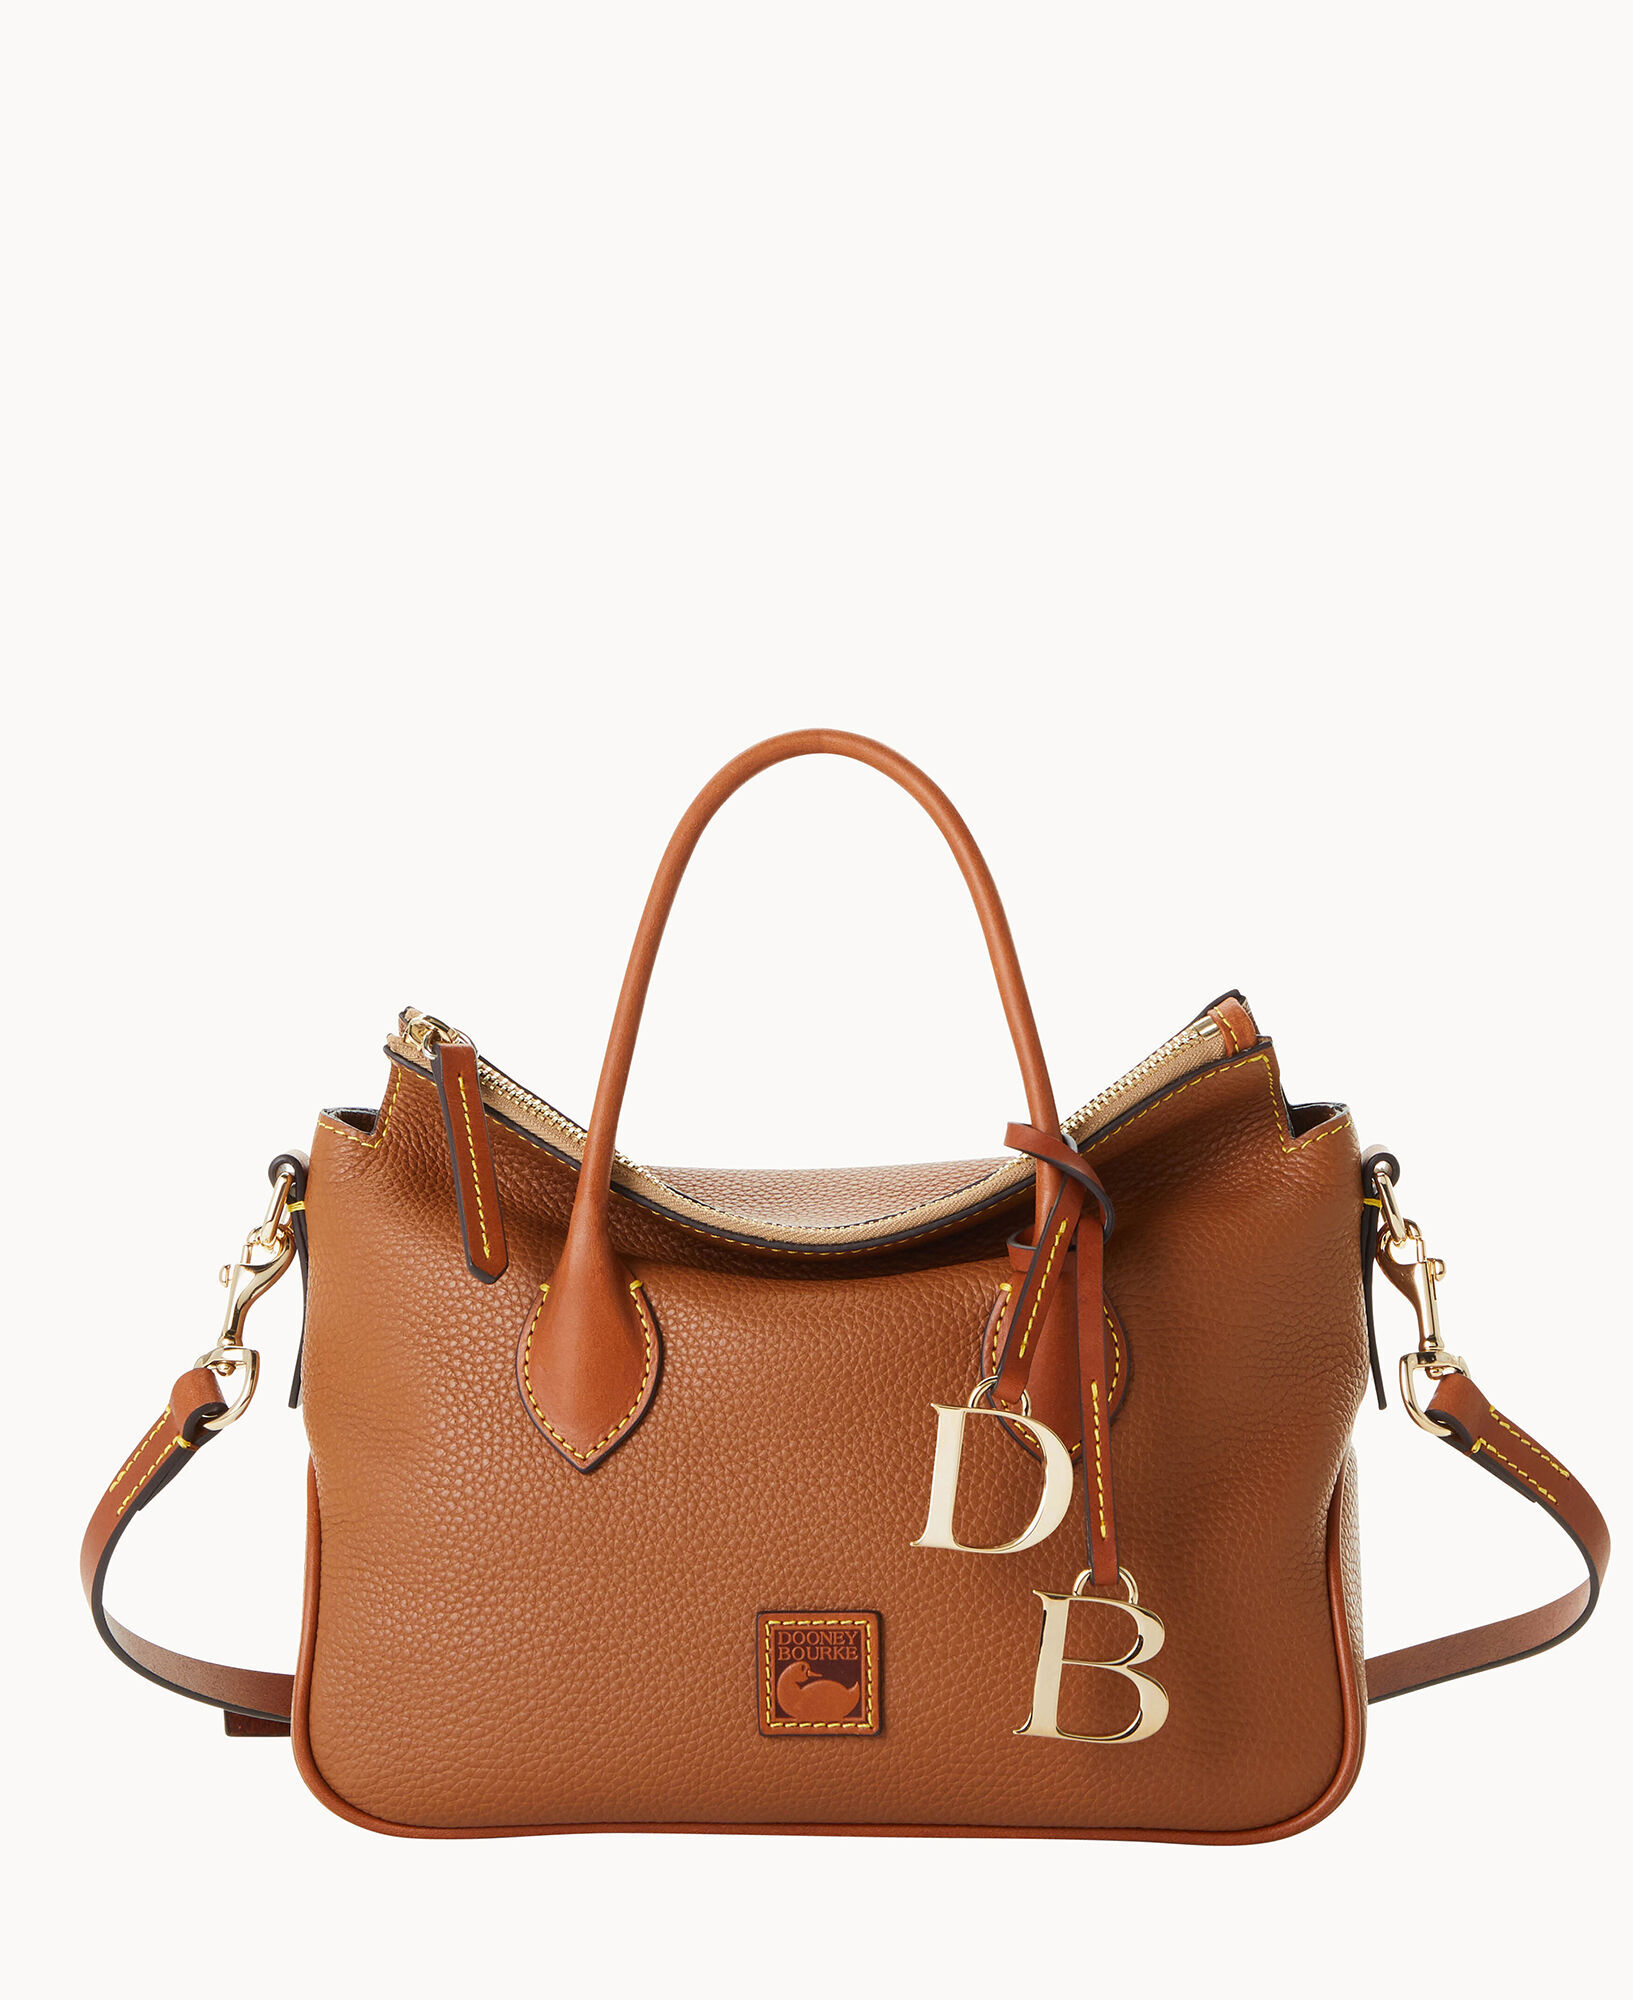 Buy the Dooney and Bourke Women's Tan Leather Purse